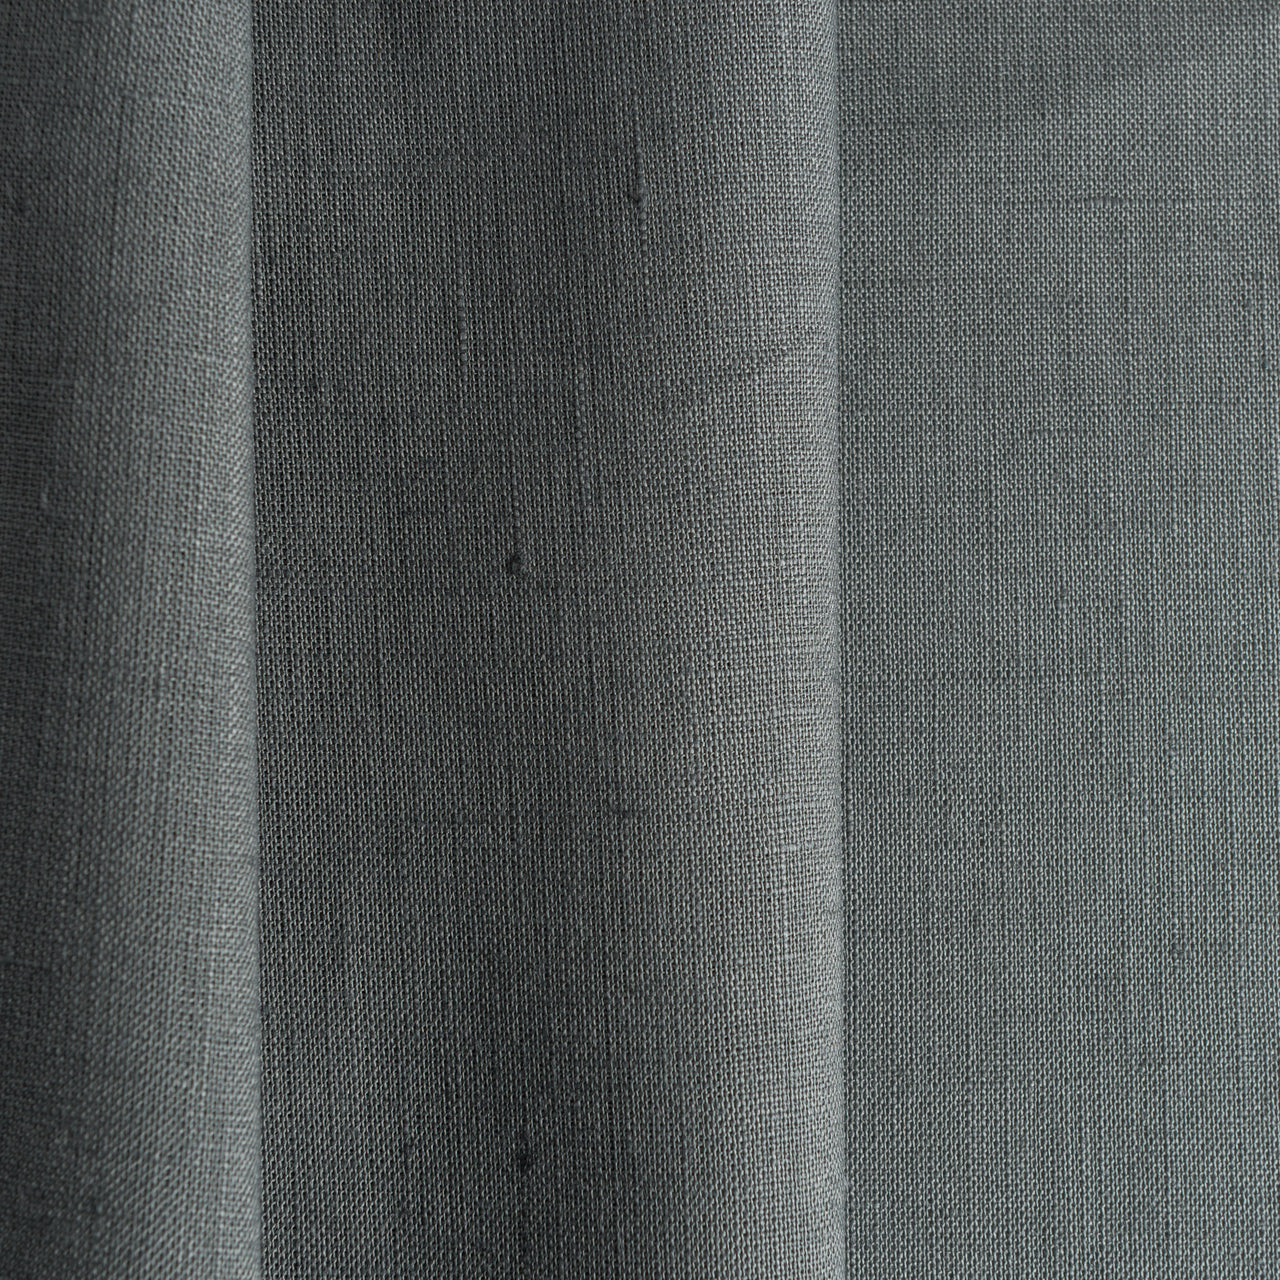 Iron Grey Linen Fabric by the Meter - 100% French Natural - Width 133 cm, 267 cm